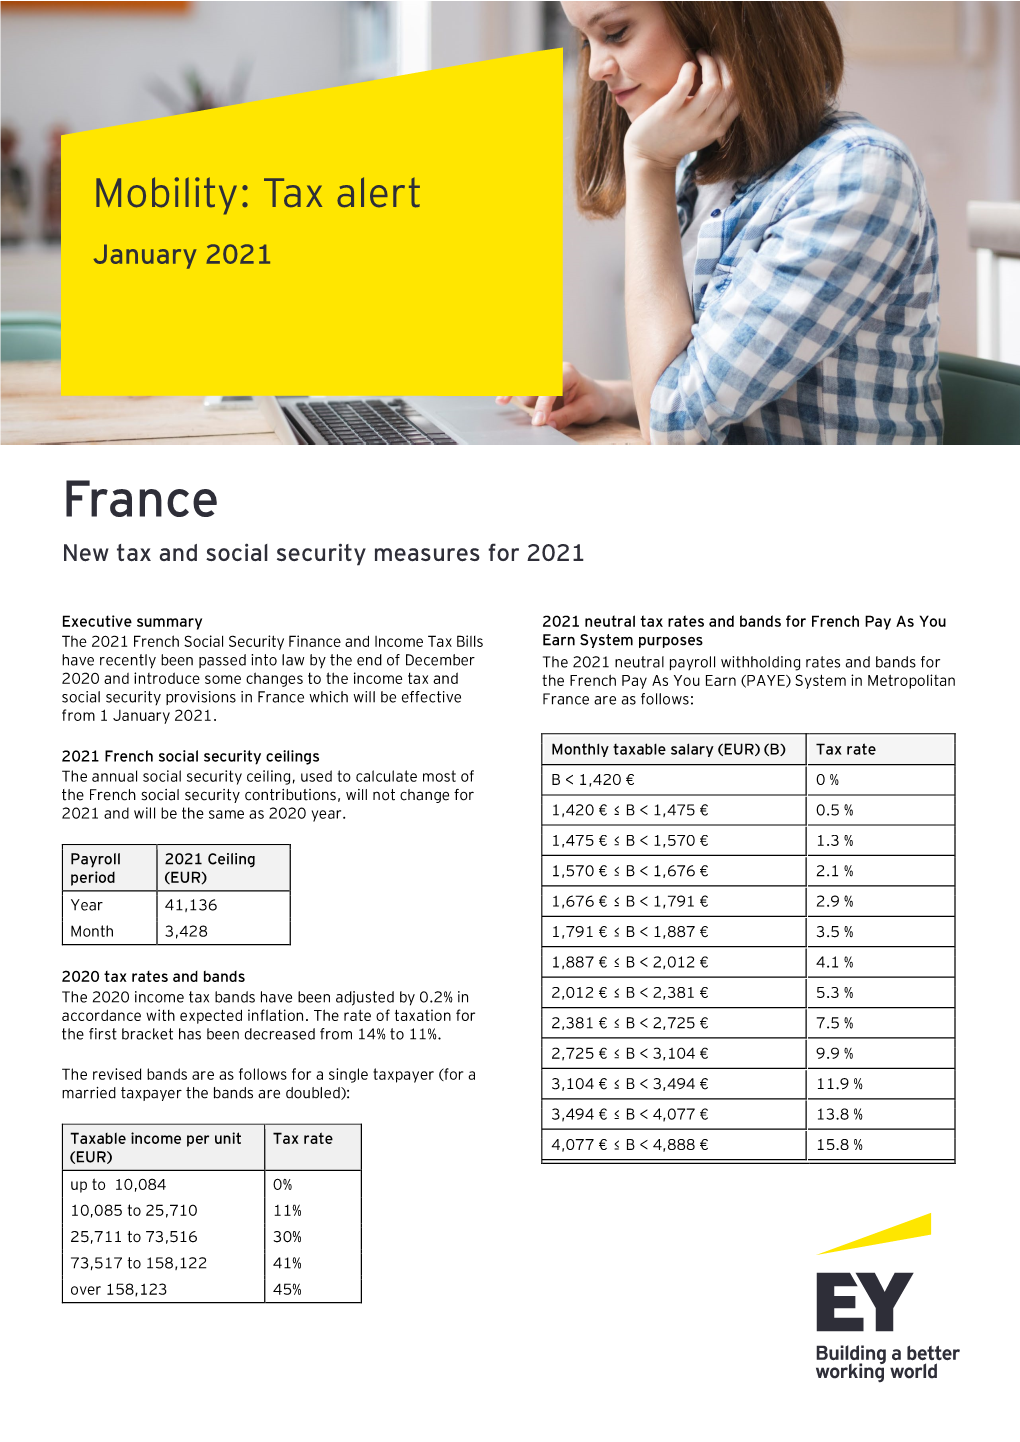 France New Tax and Social Security Measures for 2021